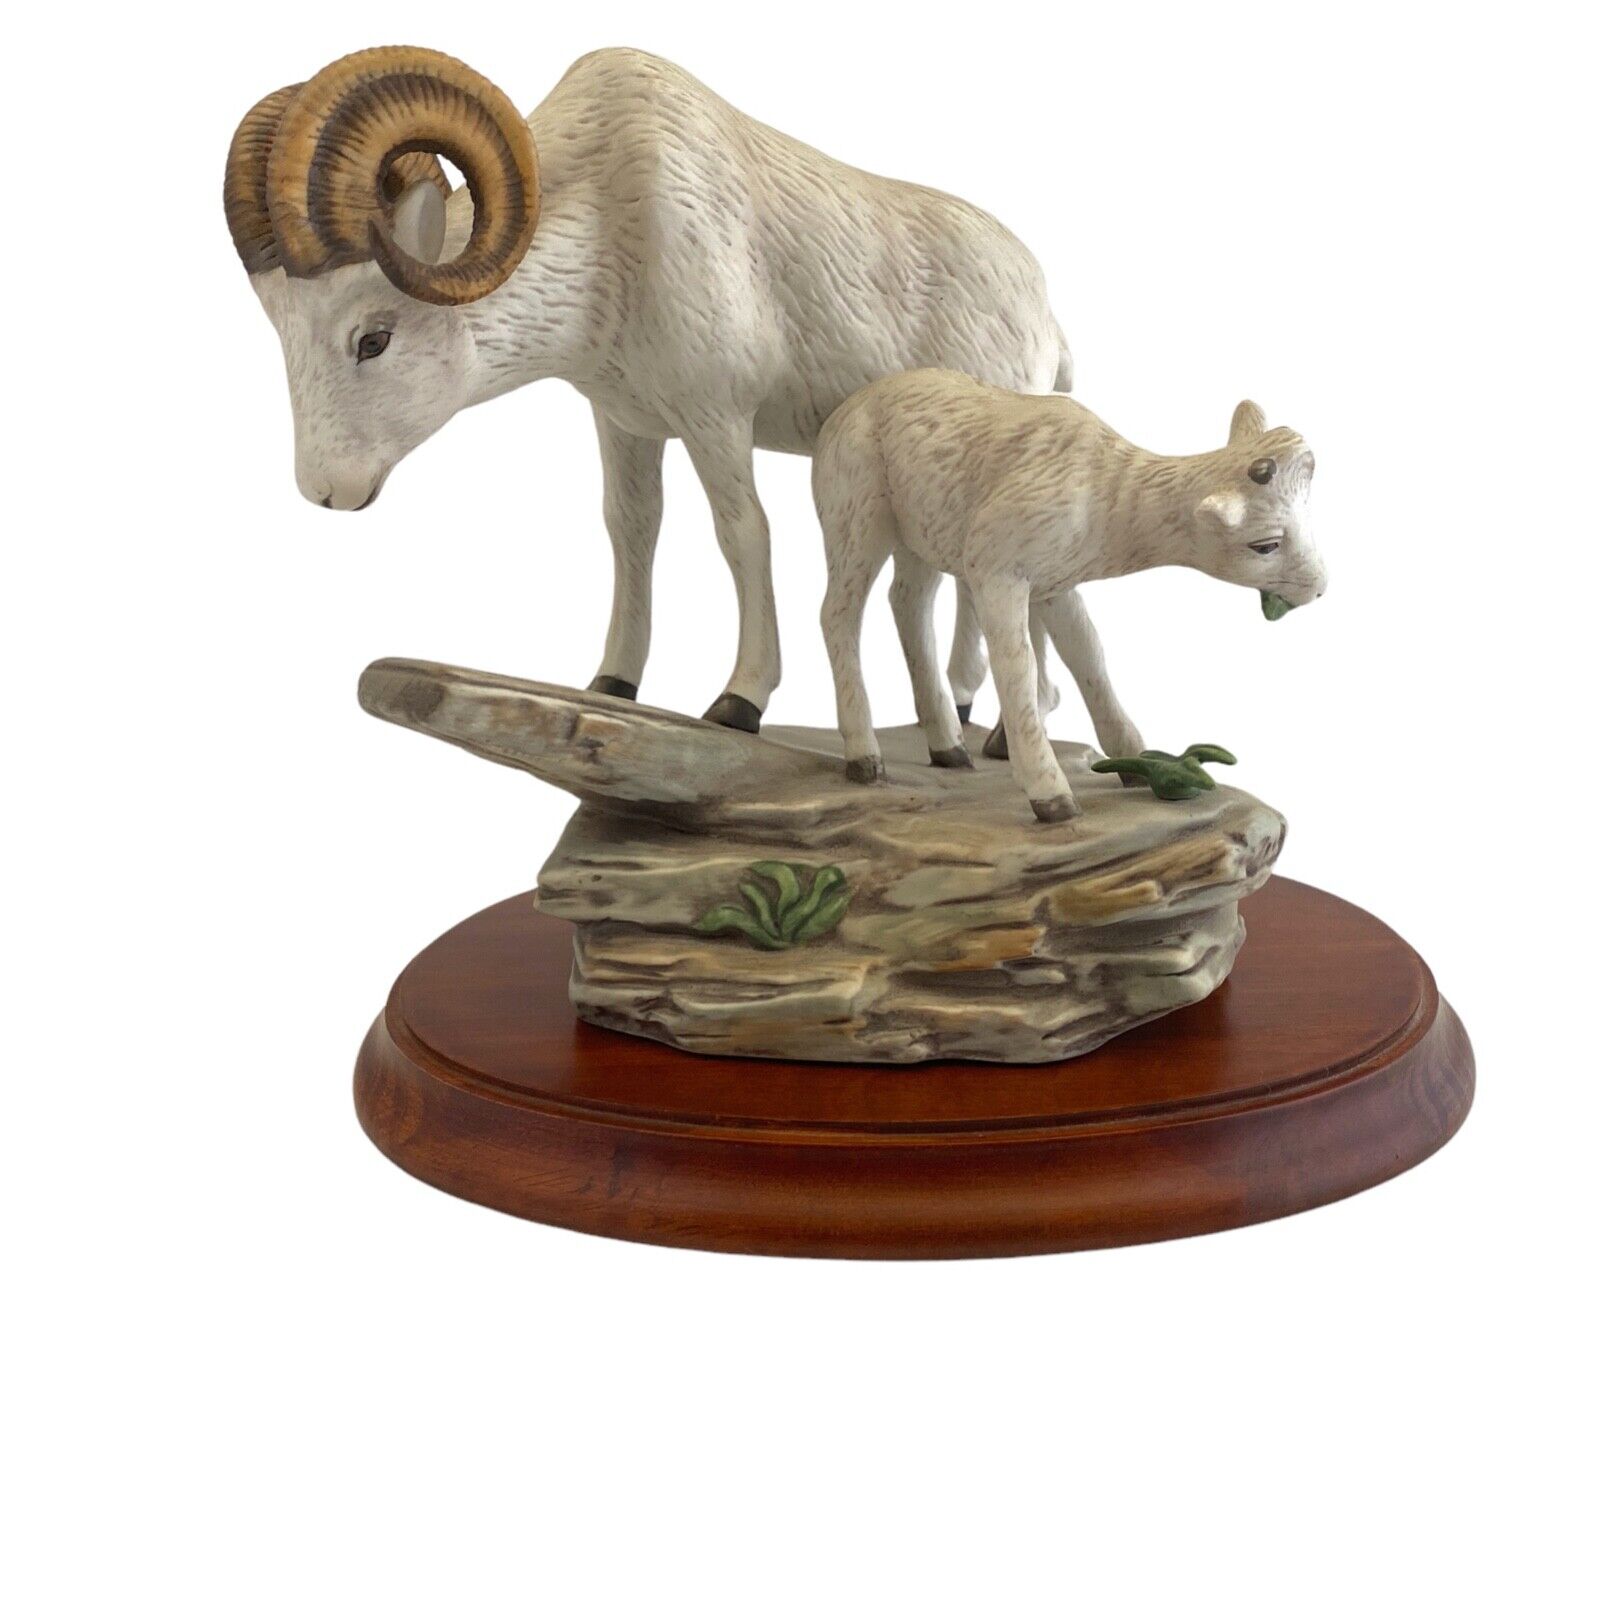 Master Piece Porcelain Figurine by HOMCO 1984 Signed Mountain Goat with Kid